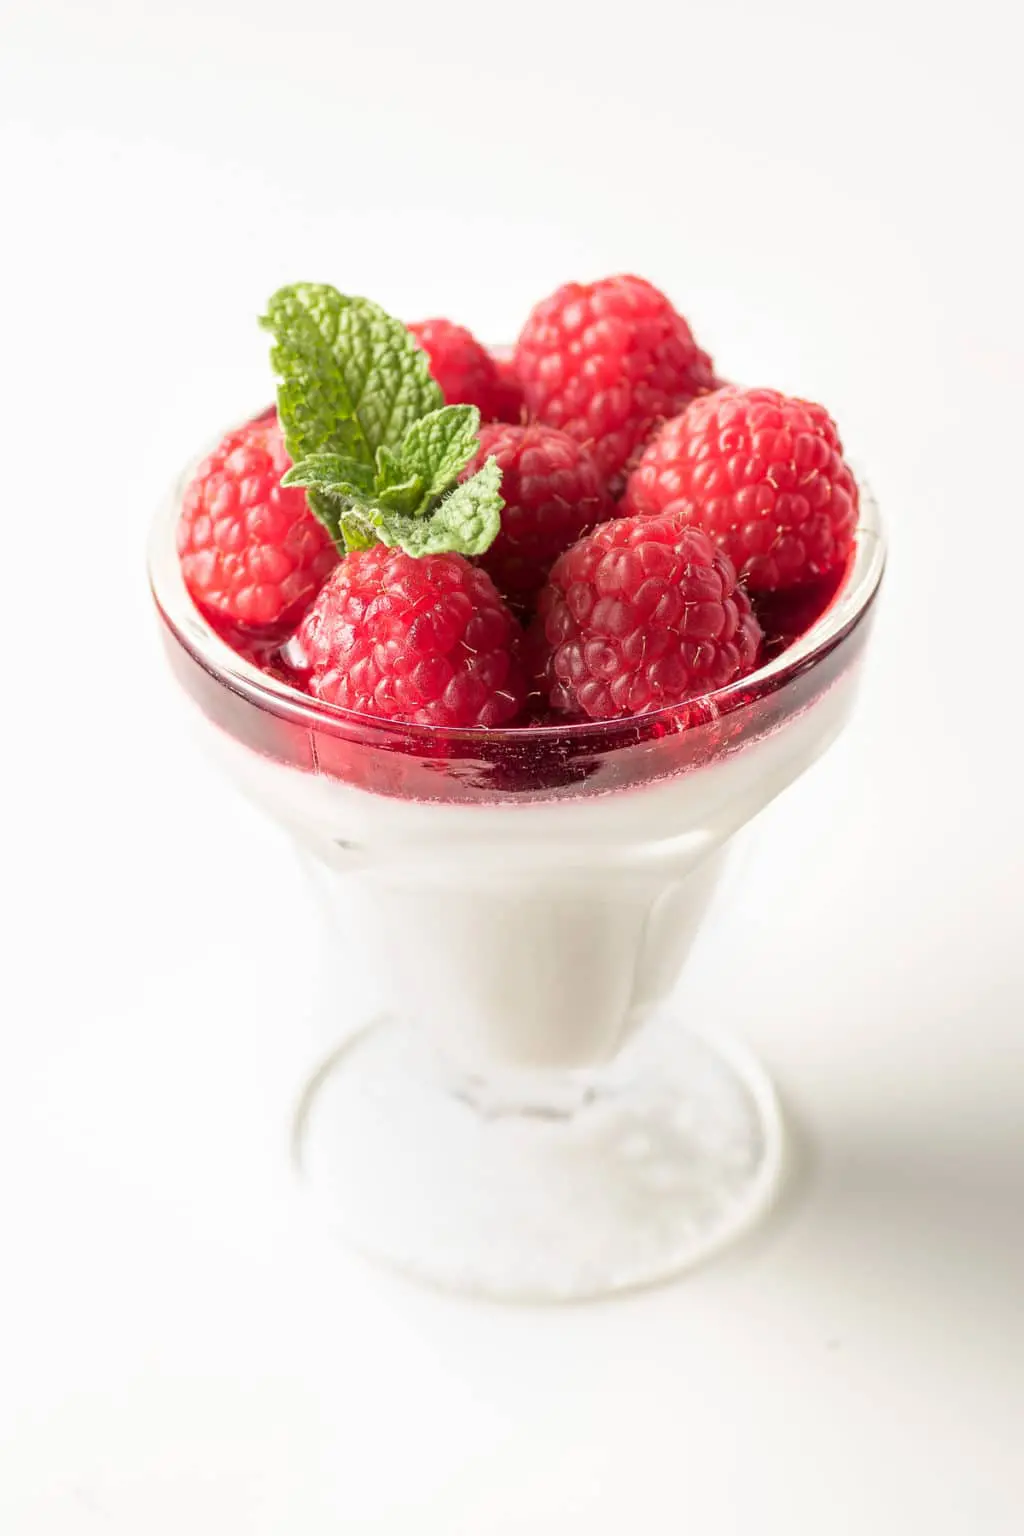 Small sundae dish with coconut milk raspberry panna cotta topped with red ripe raspberries and a sprig of mint.